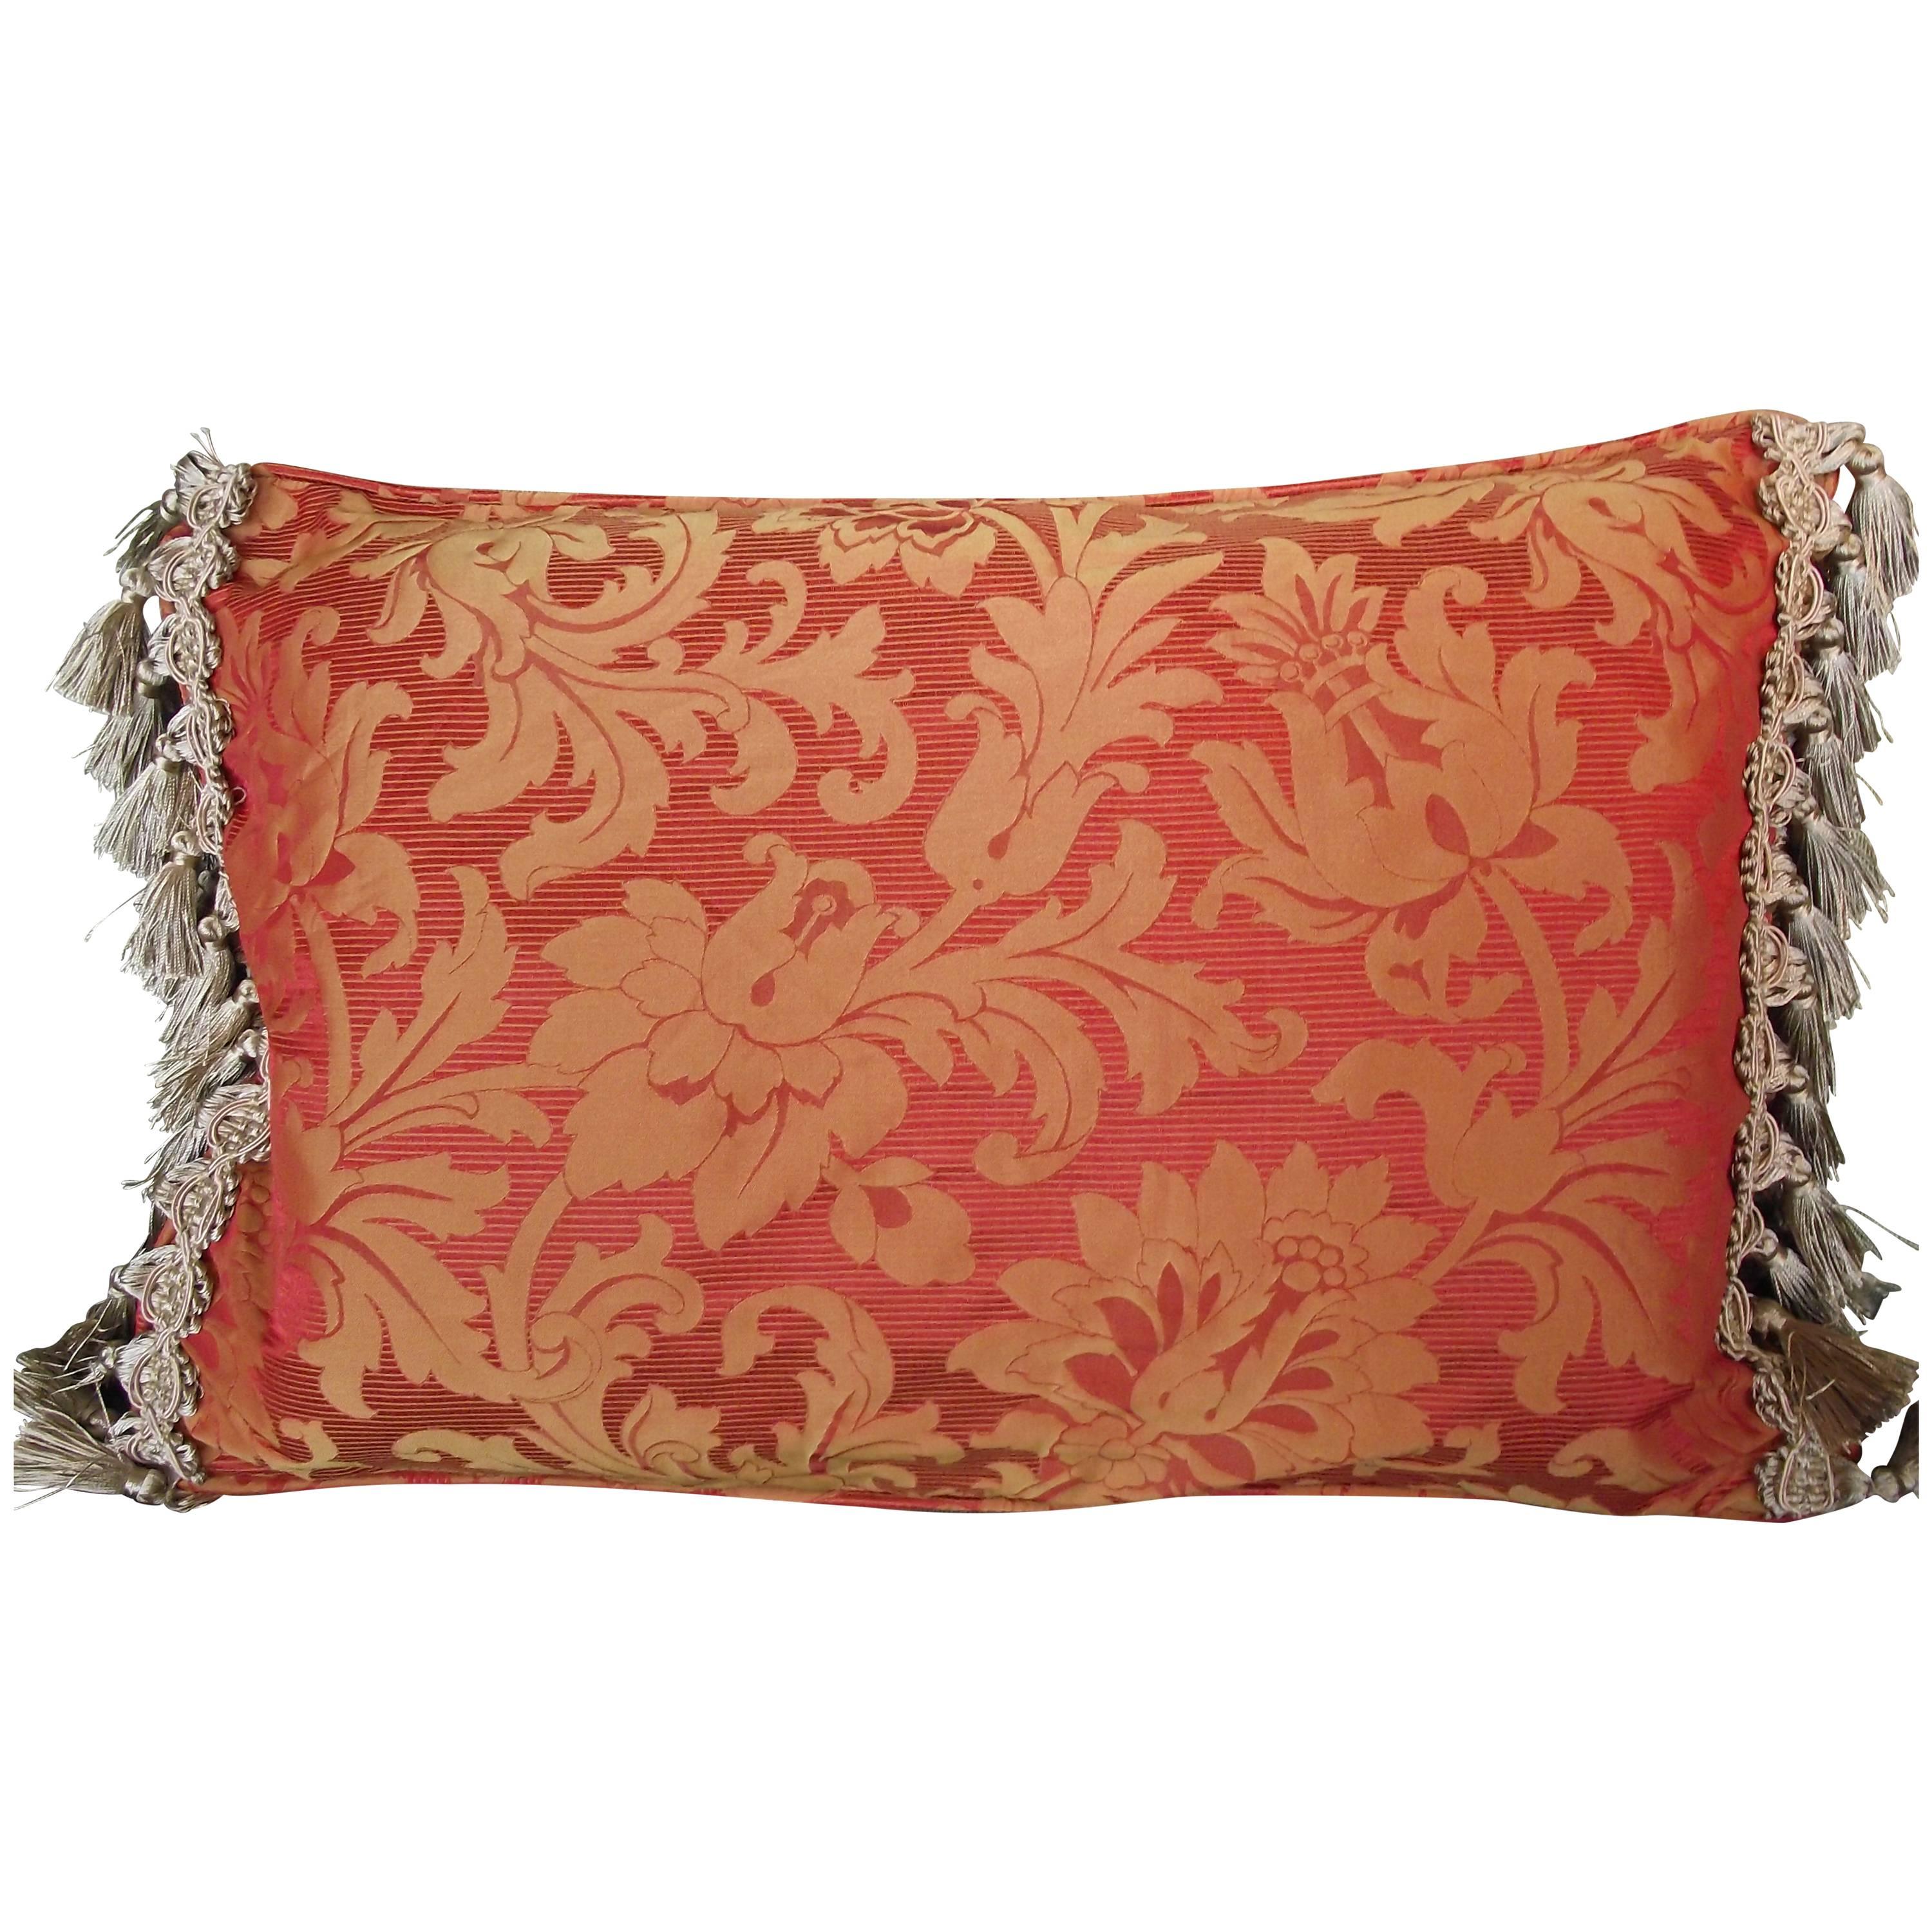  Bolster Pillow in Tangerine (orange) and Gold Brocade with double tassel trim